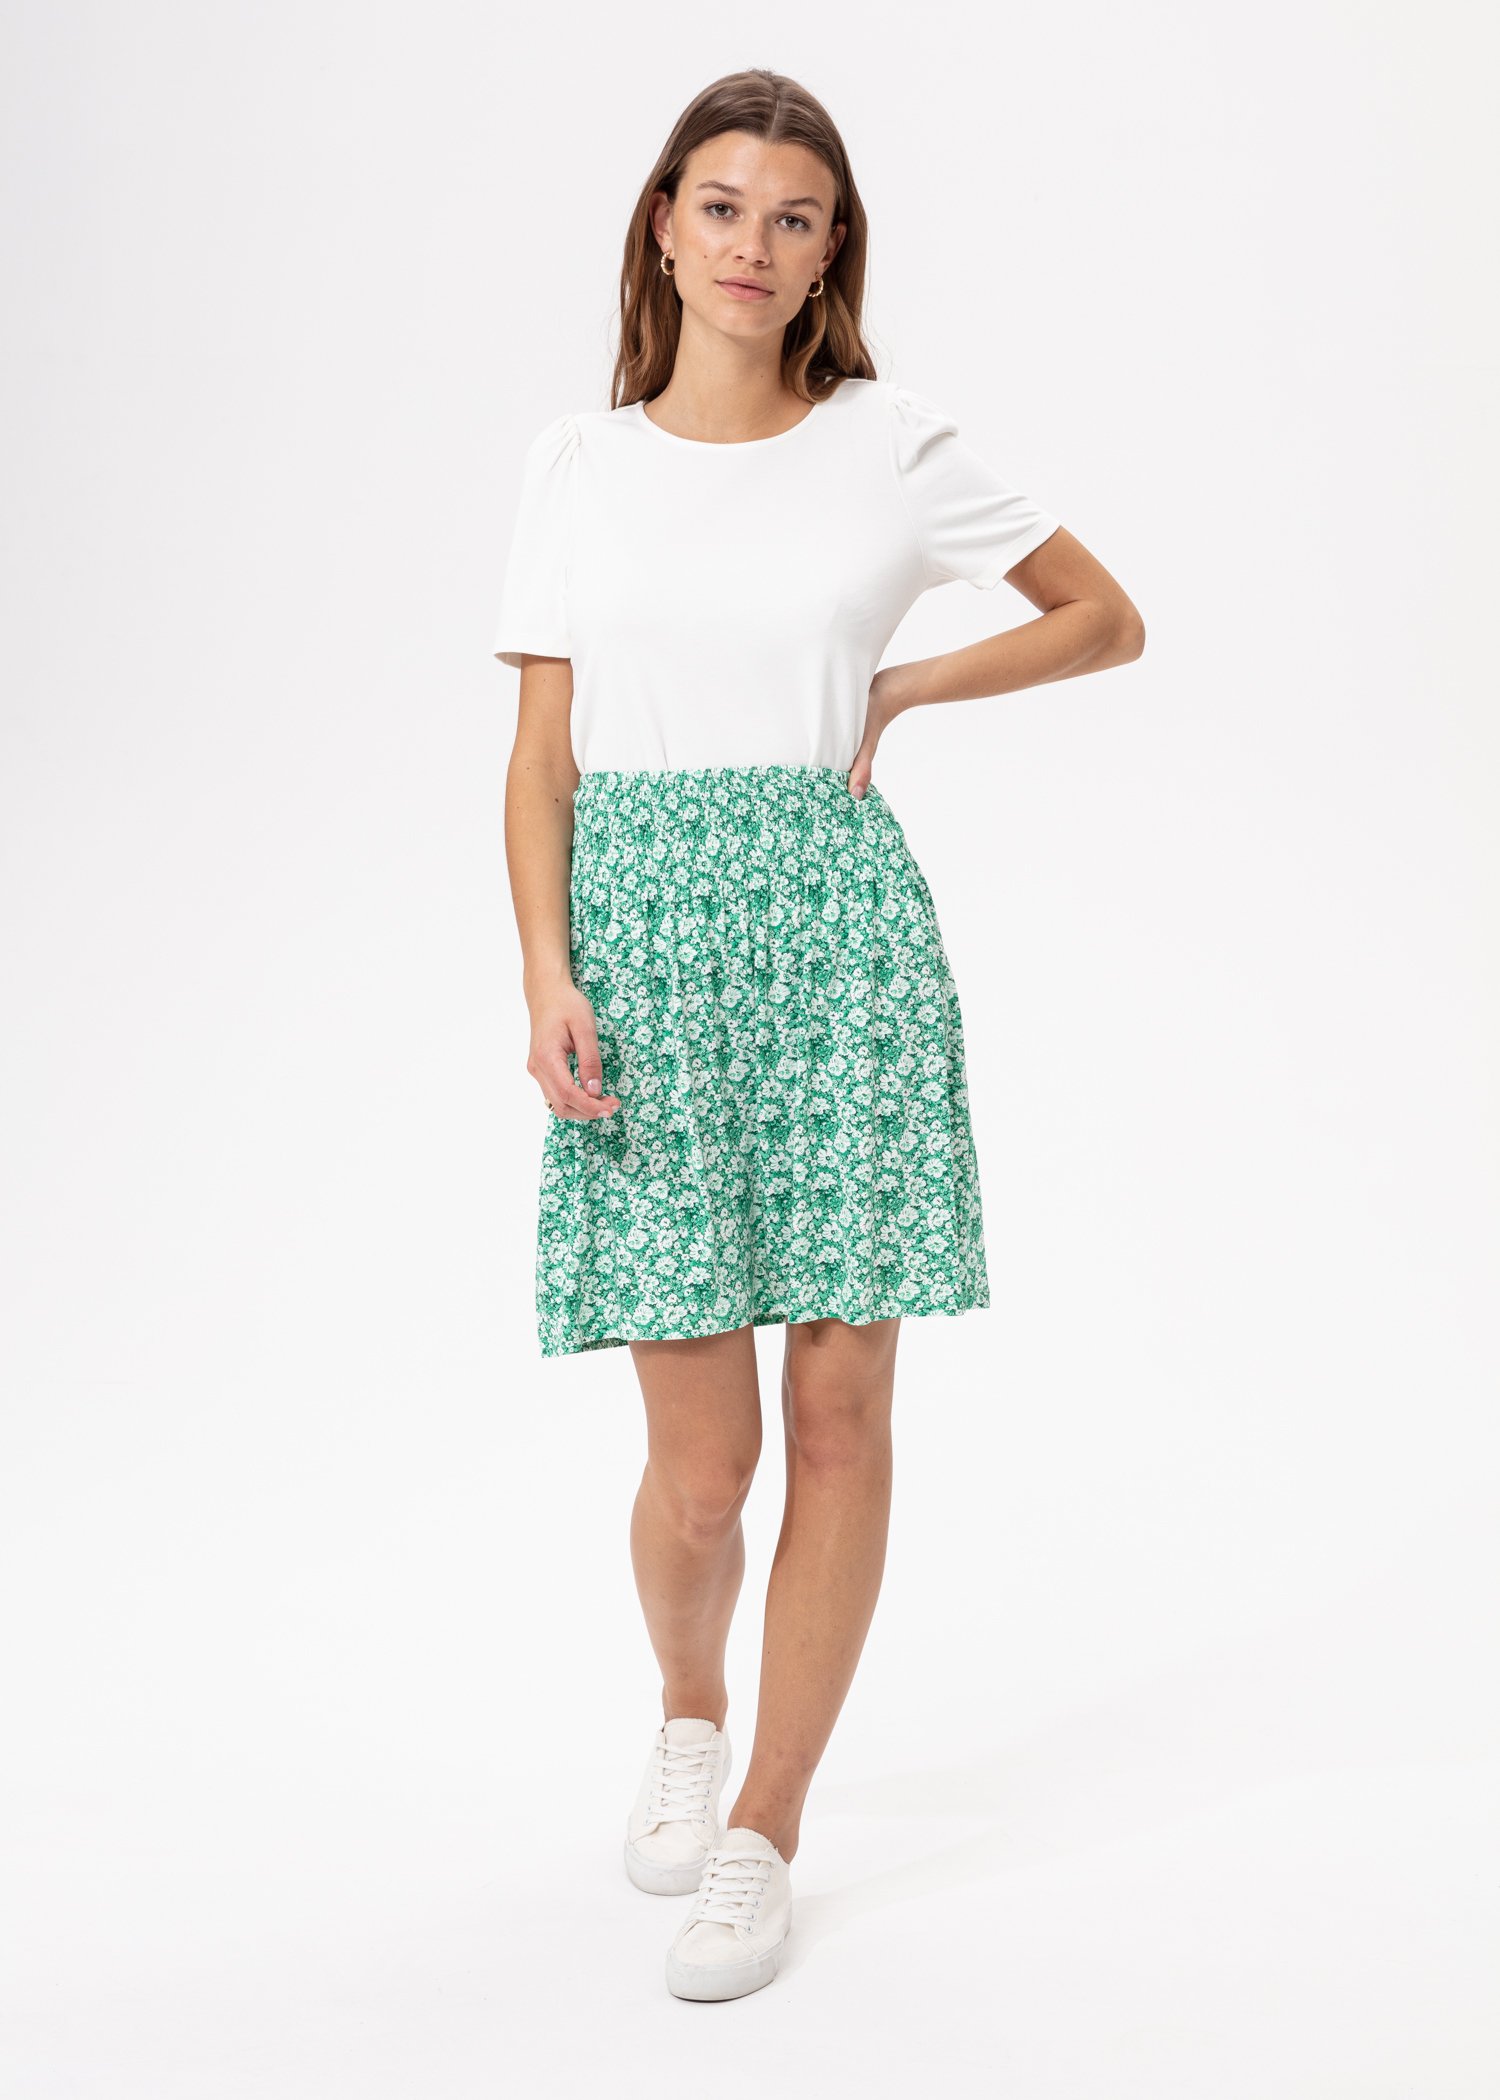 Elastic skirt with smock details